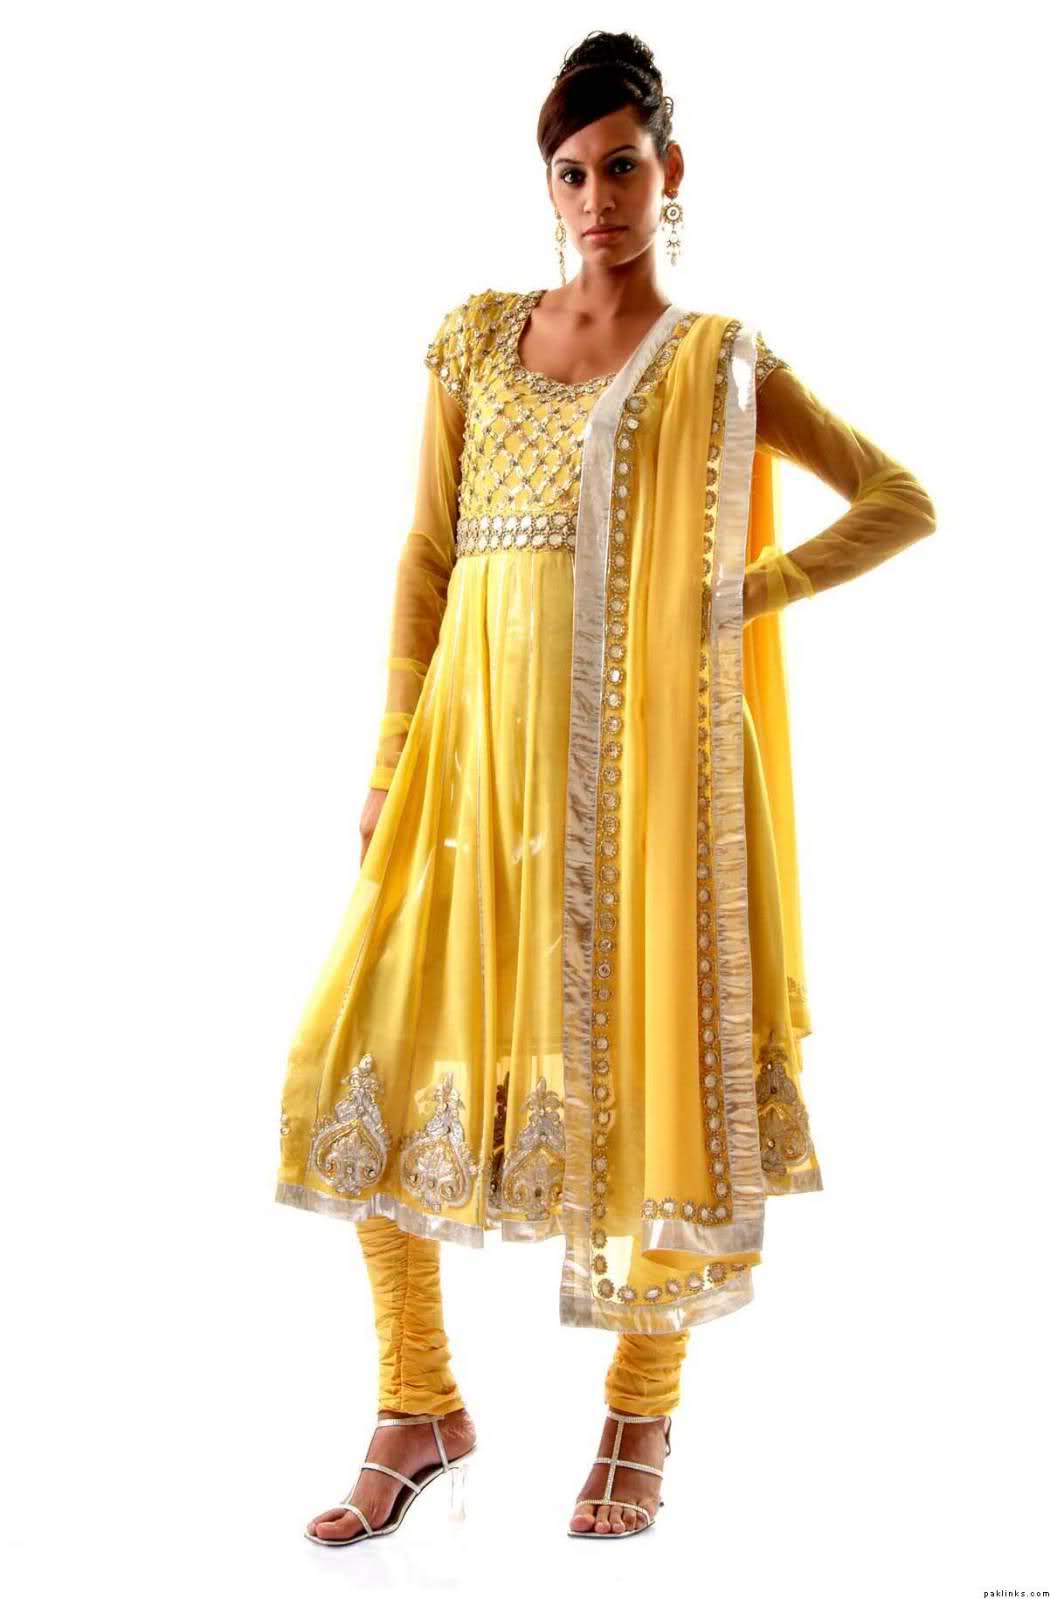 lace a-line wedding dresses with sleeves full sleeves yellow chest design, boarder enmrioded design, churidaar 